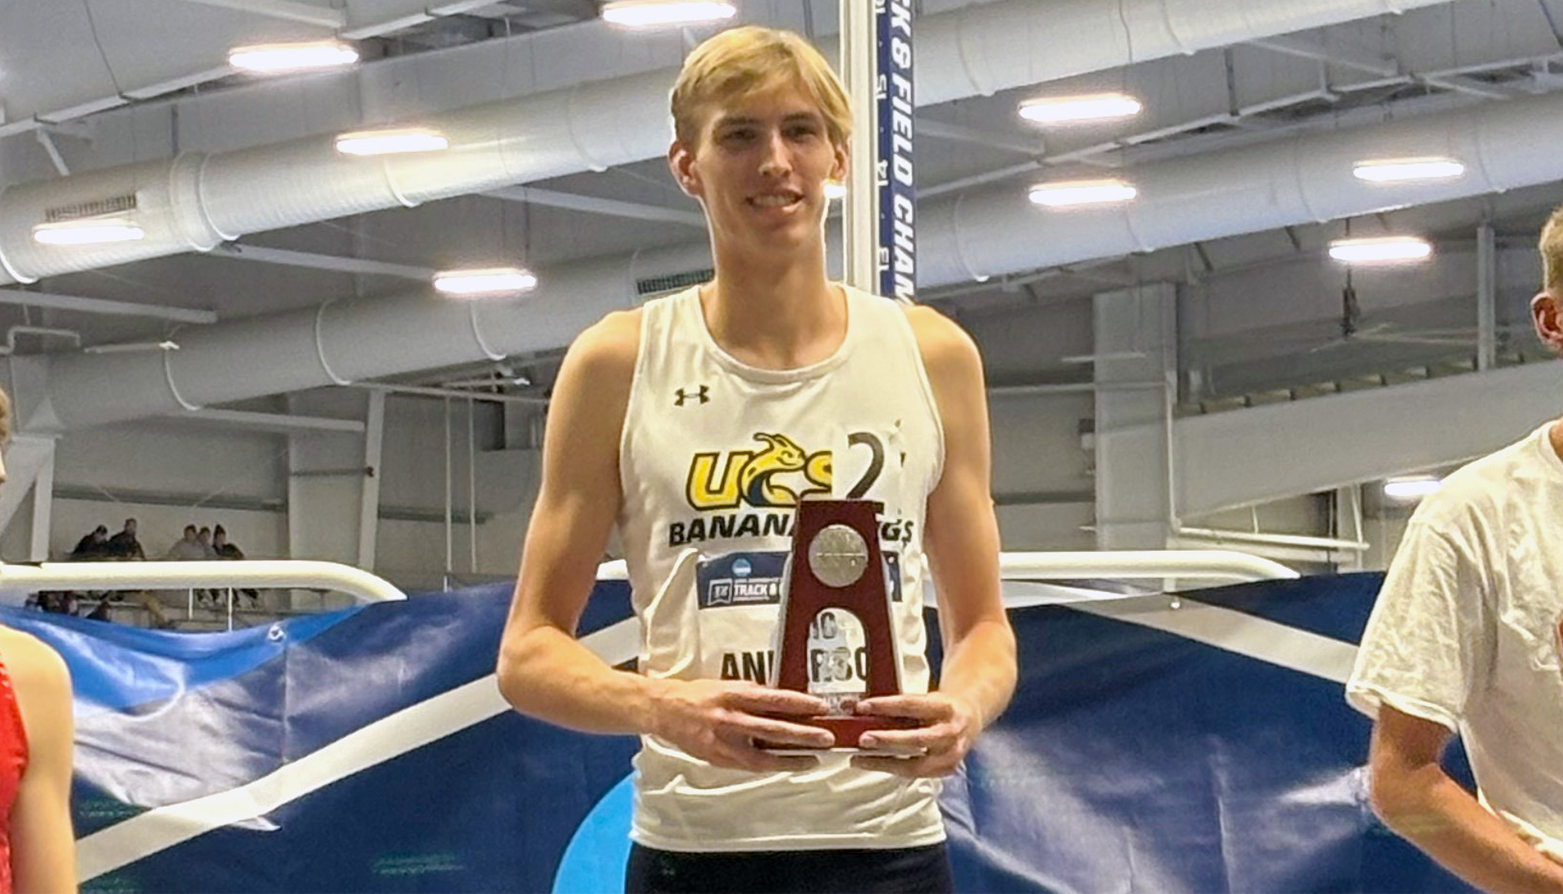 UCSC's Eric Anderson places second in mile at NCAA Indoor Championships